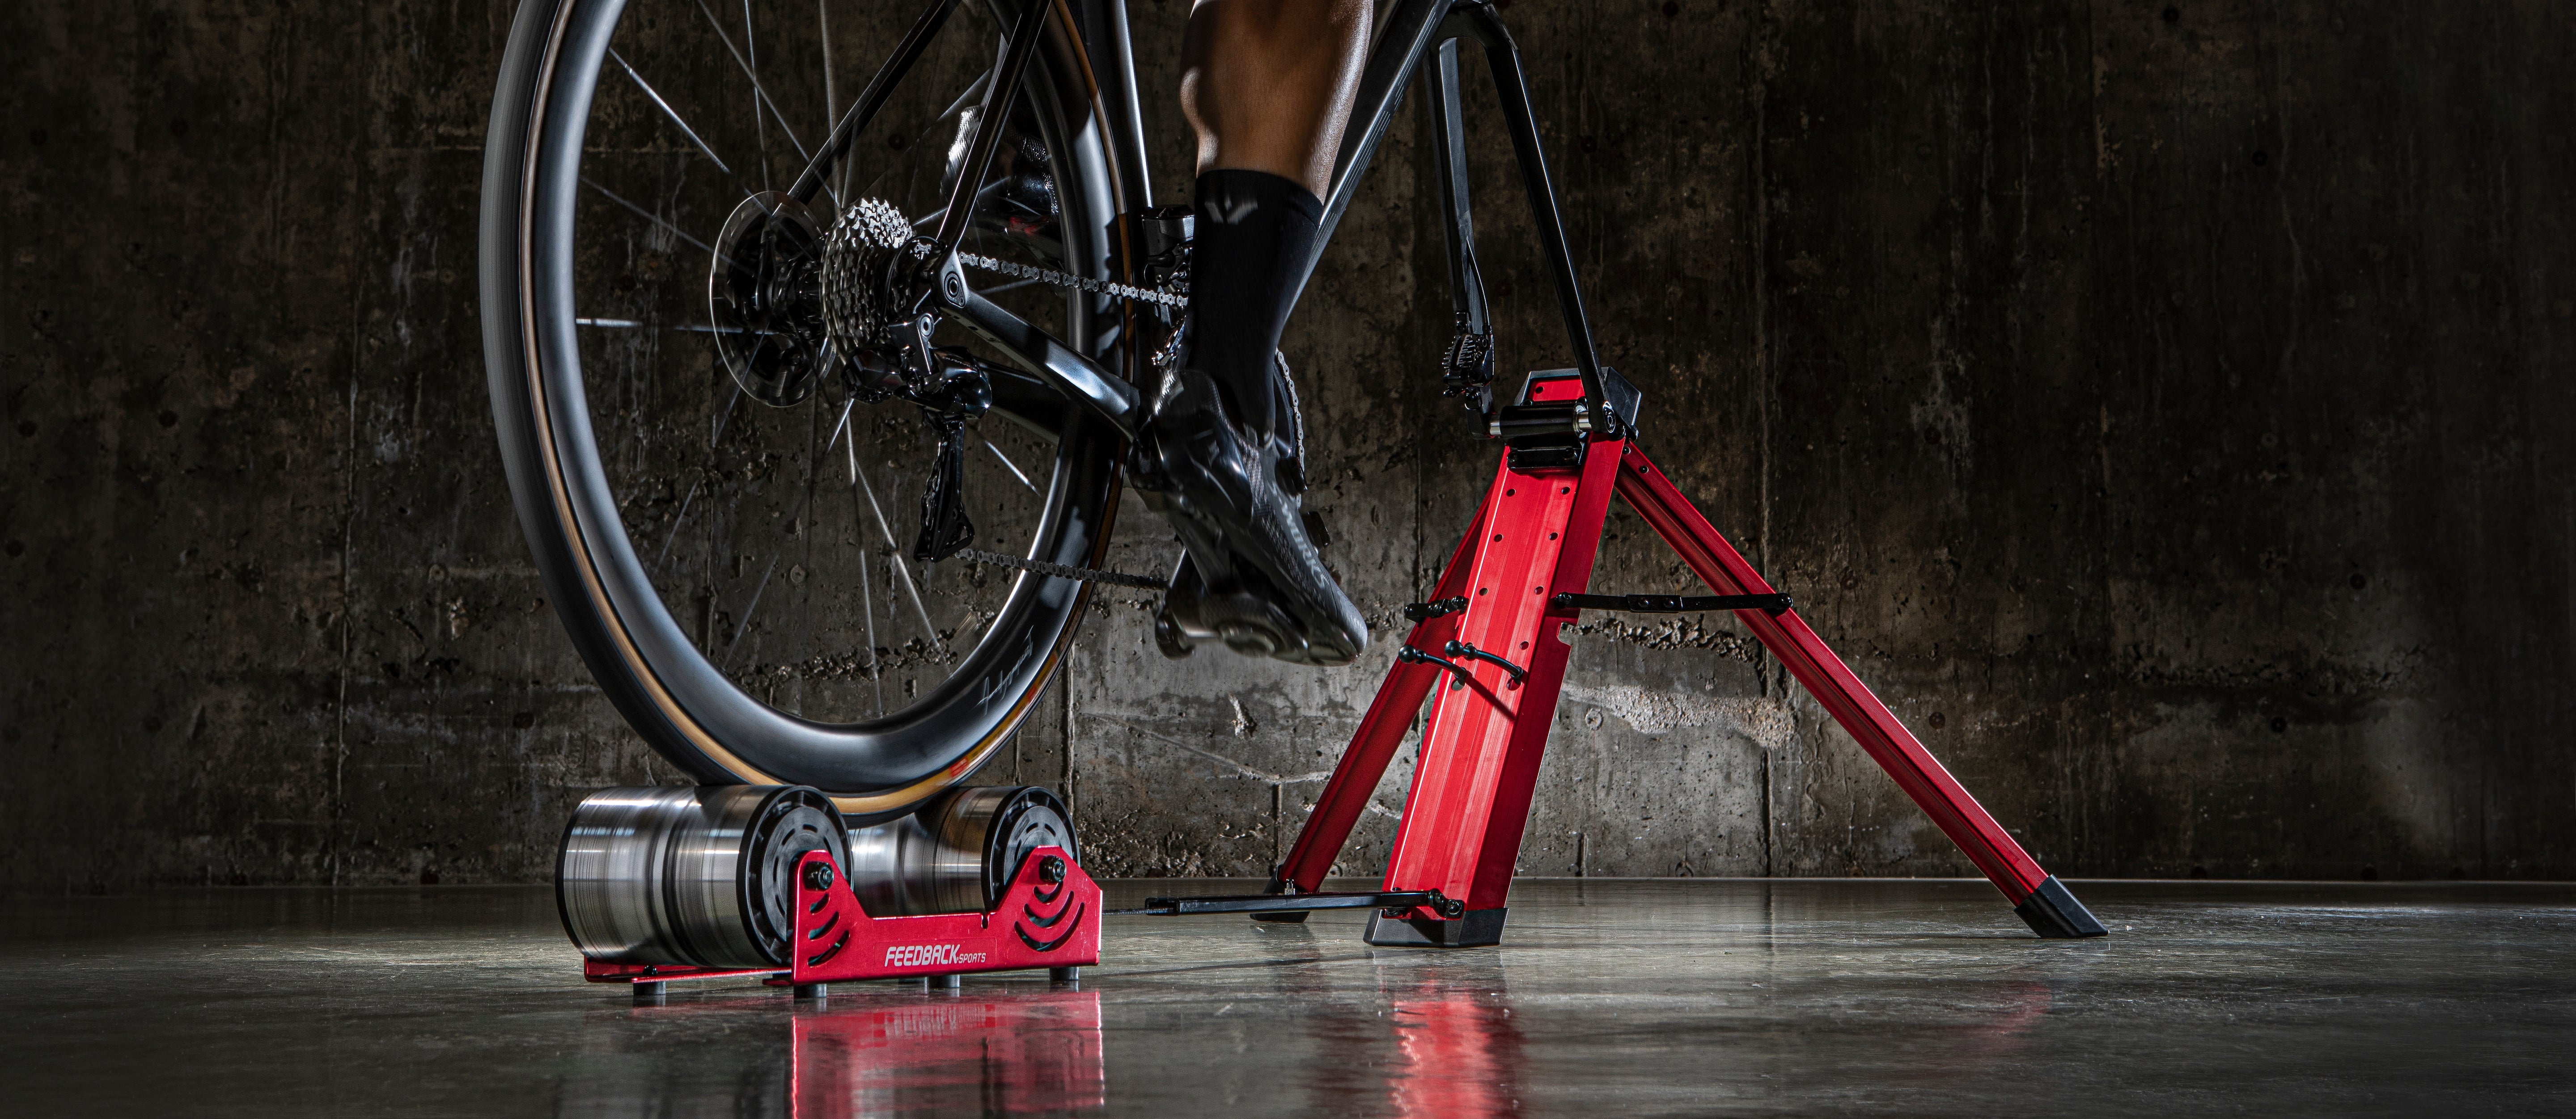 An image of a stationary bike trainer.